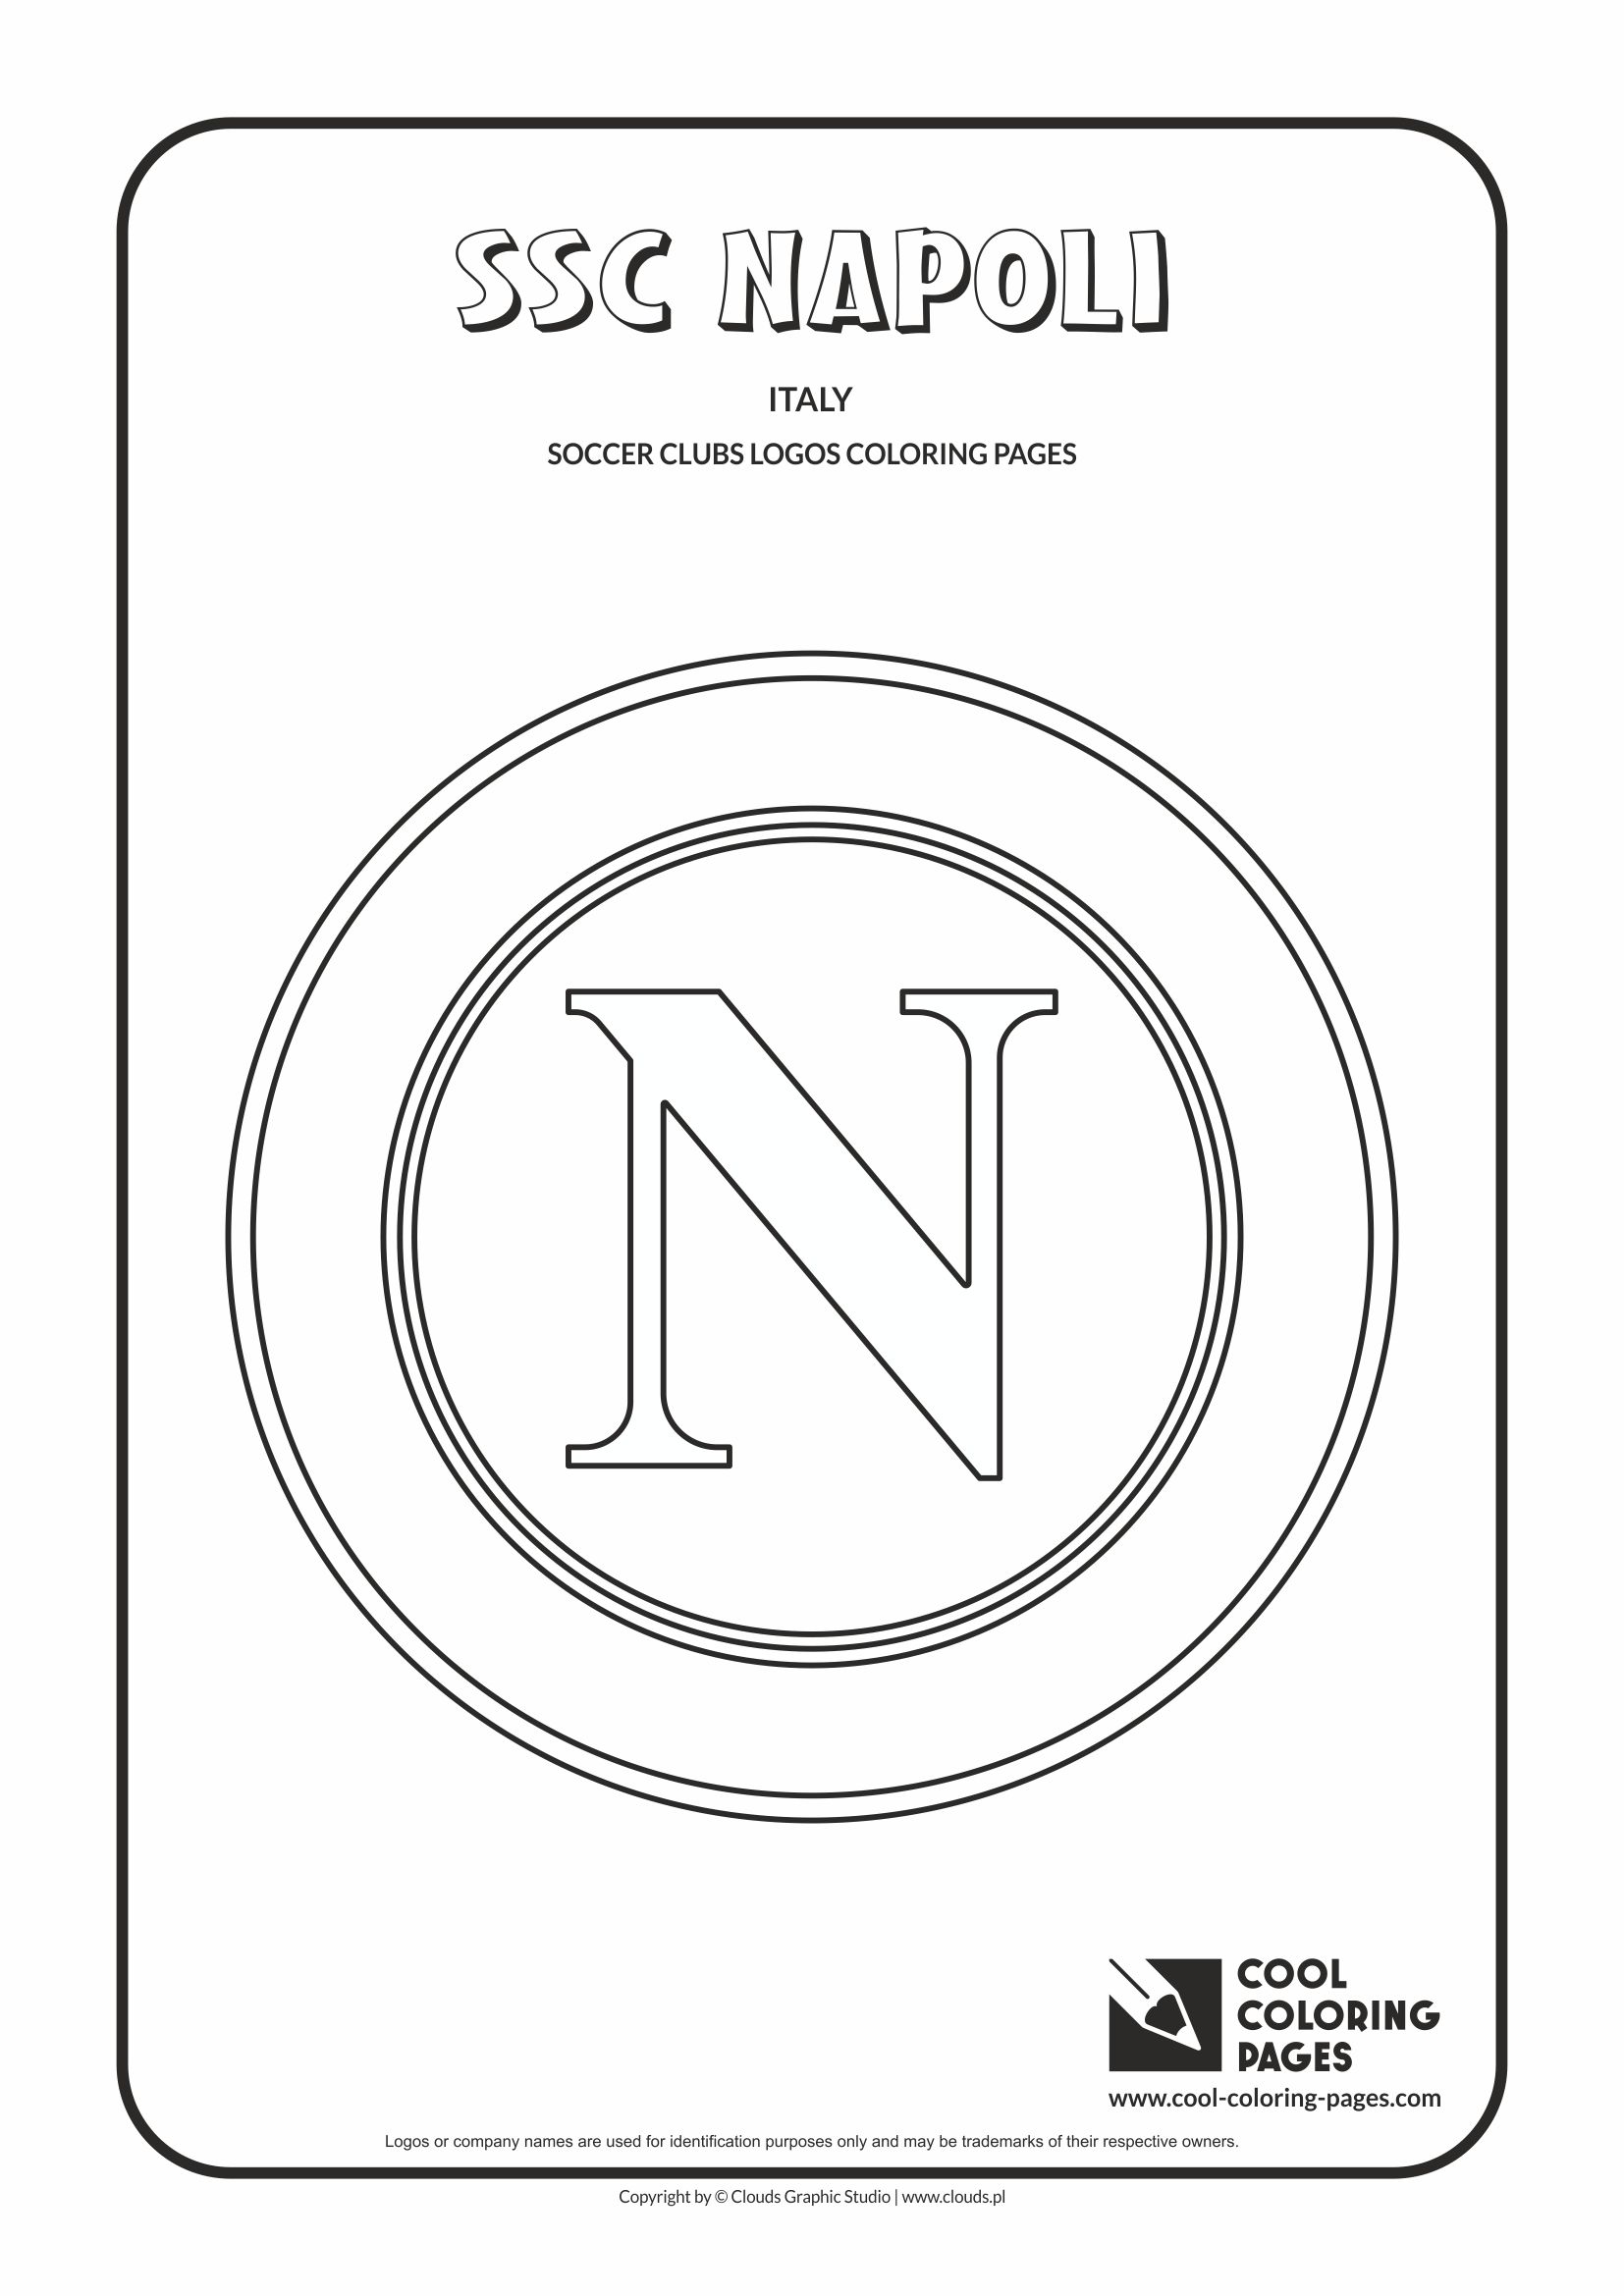 S.S.C. Napoli logo coloring / Coloring page with S.S.C. Napoli logo / Napoli logo colouring page.